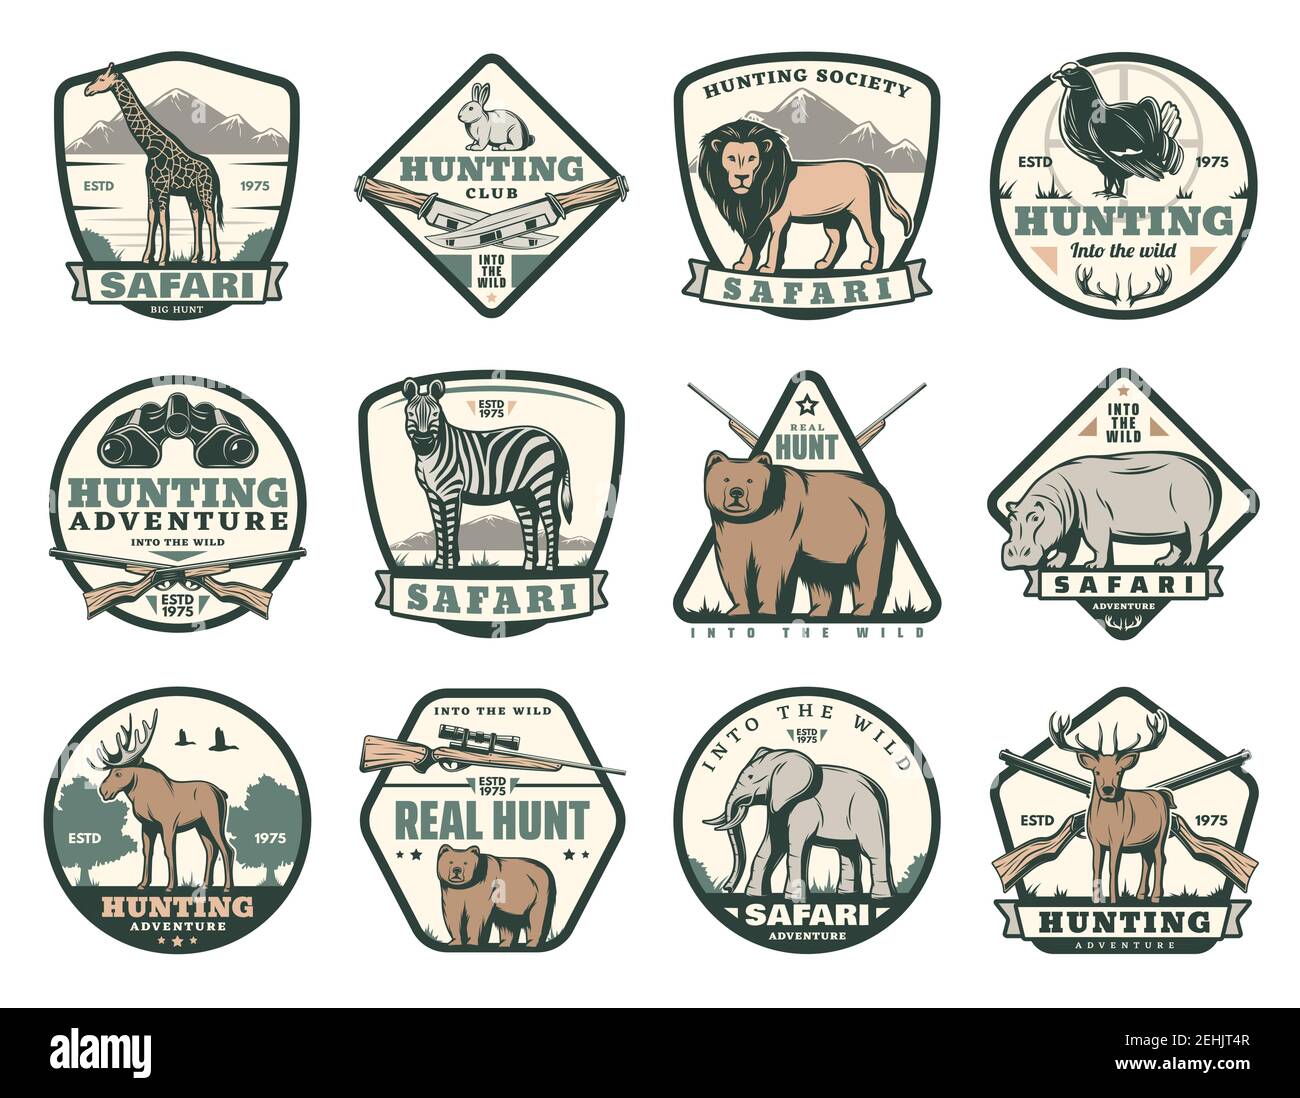 Hunting club icons of wild animals for African safari and open season hunt.  Vector badges for hunter society giraffe, lion or rabbit and pheasant bird  Stock Vector Image & Art - Alamy